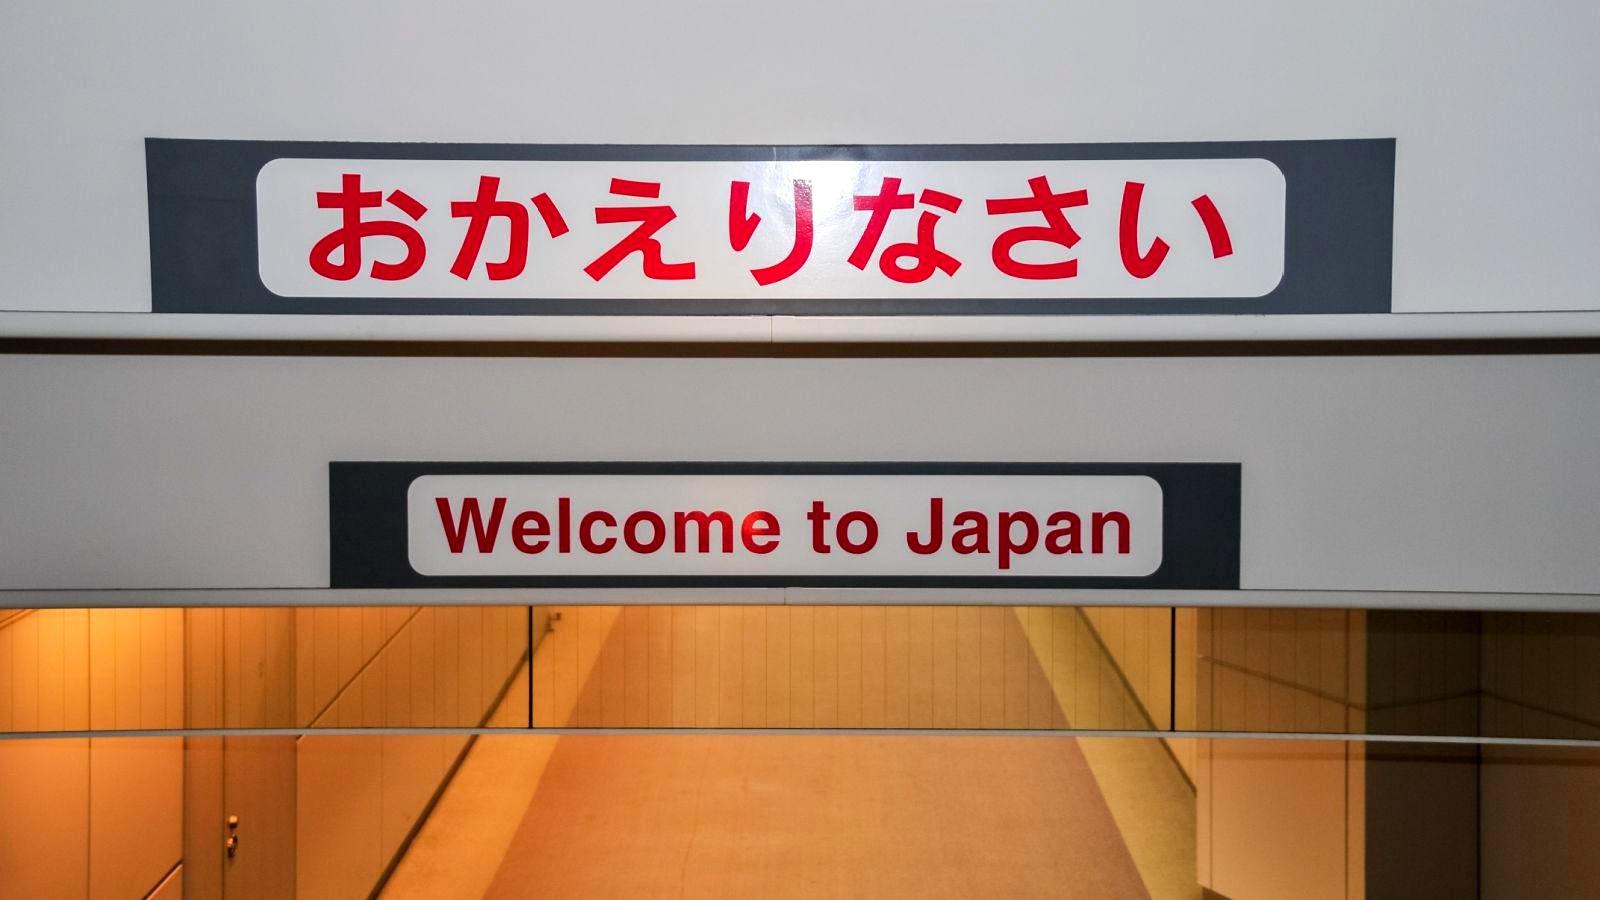 Japan drops entry requirements for inbound travellers to submit vaccination proof or a negative test result